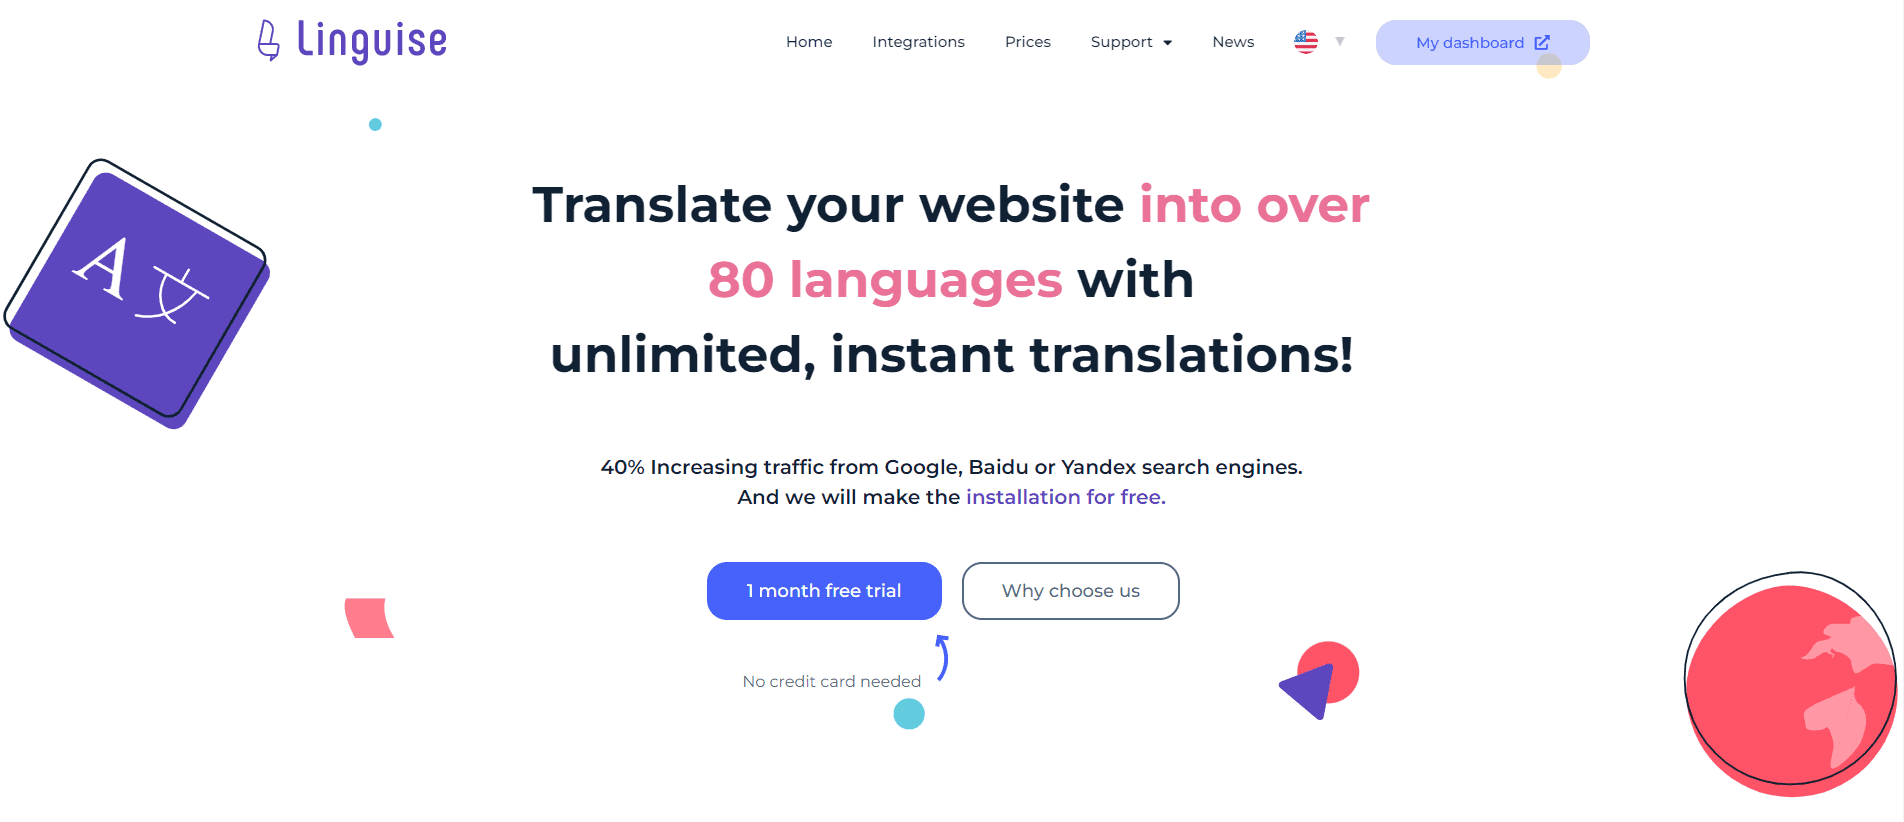 Linguise Review